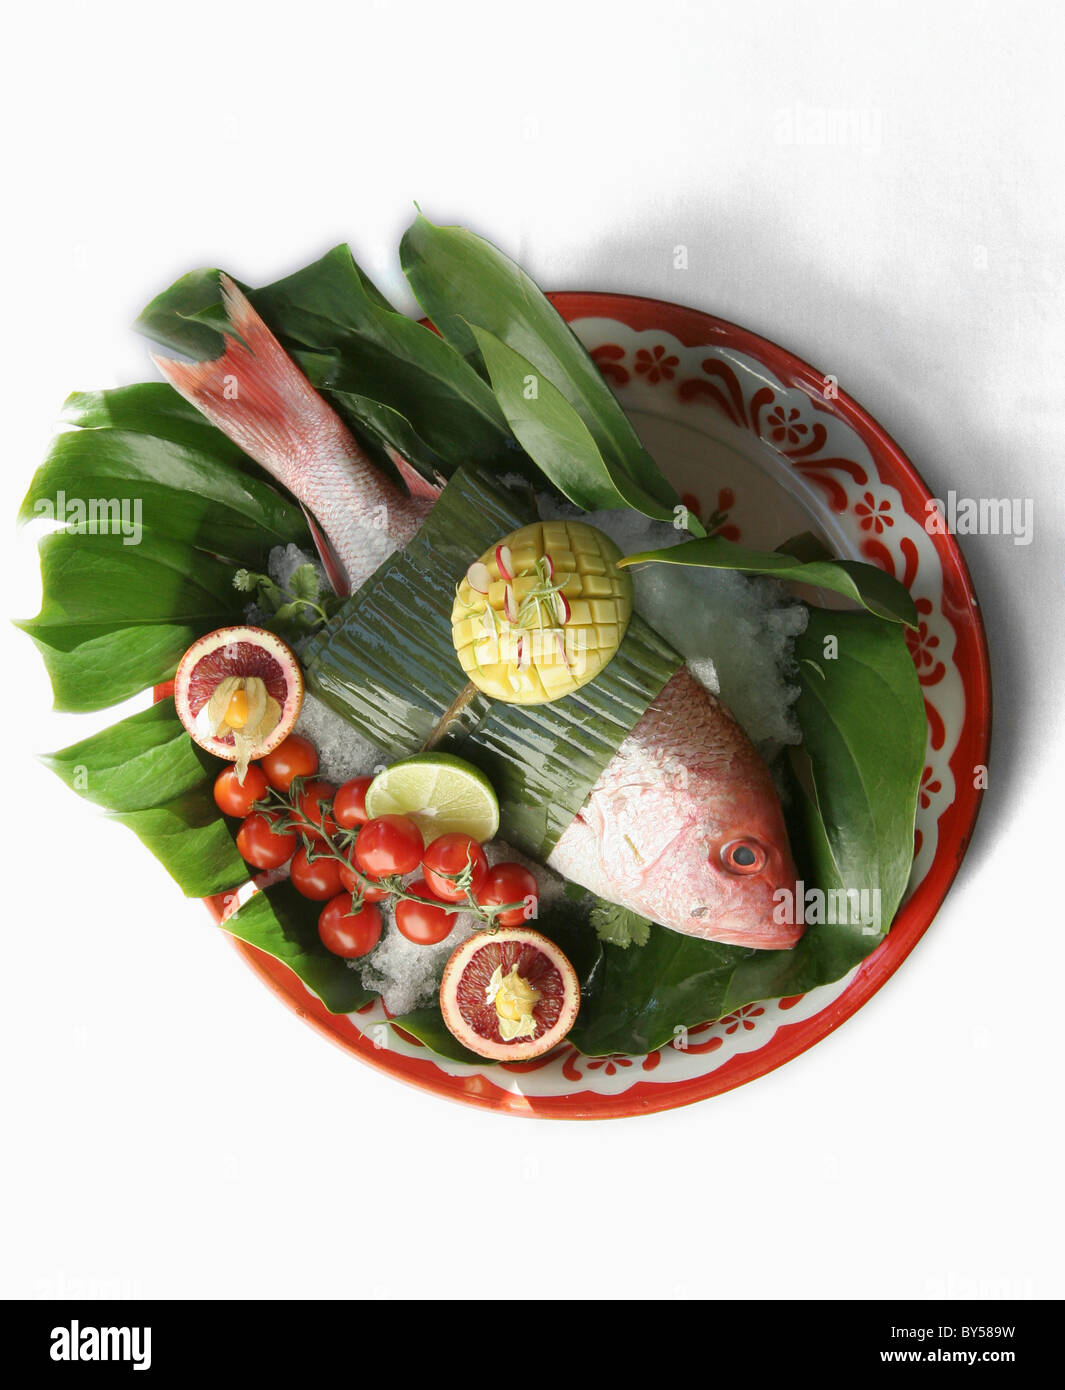 Red Snapper Wrapped In Banana Leaves, wrapped